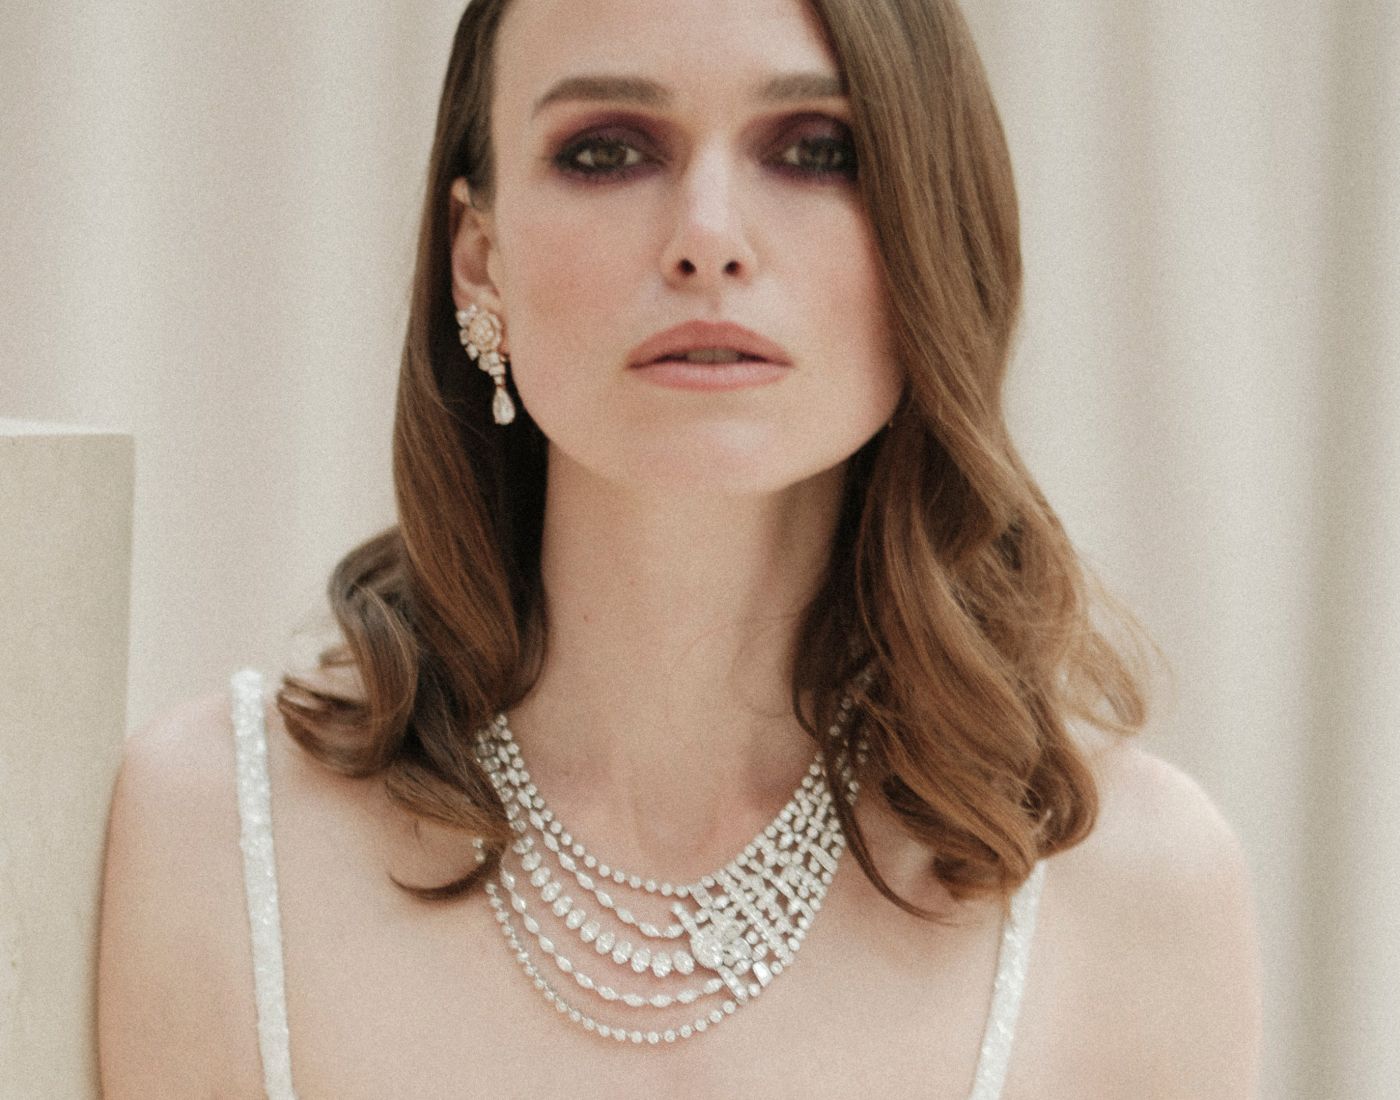 Actress Keira Knightley in the Chanel Tweed Mademoiselle necklace in white gold and diamonds, including an oval-cut diamond of 5.01 carats, from the Tweed Ruban set of the Tweed de Chanel High Jewellery Collection. 